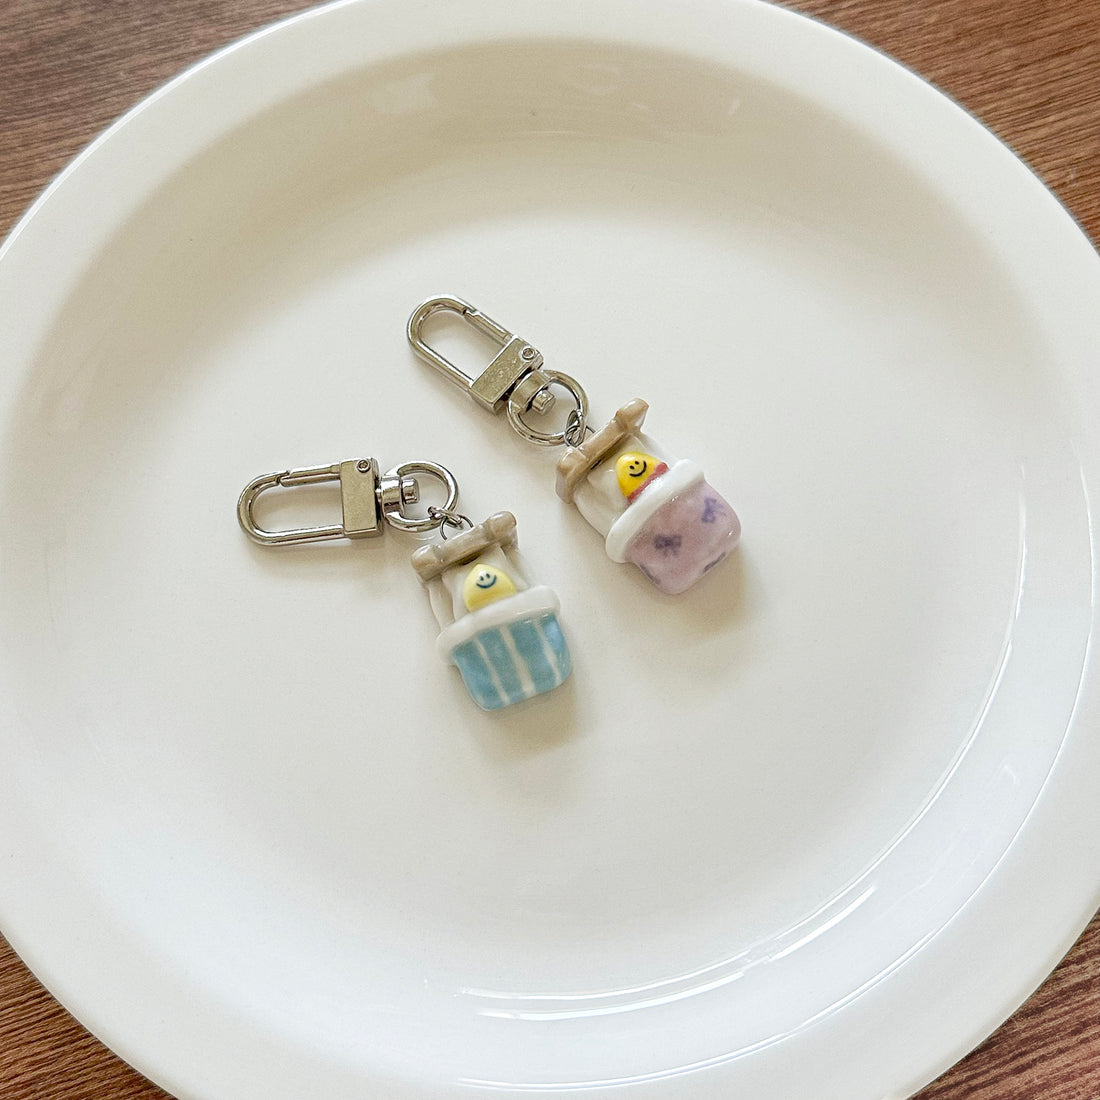 Second Morning x bee-arc-hive Bed Ceramic Keyring 陶瓷小床吊飾（2款）